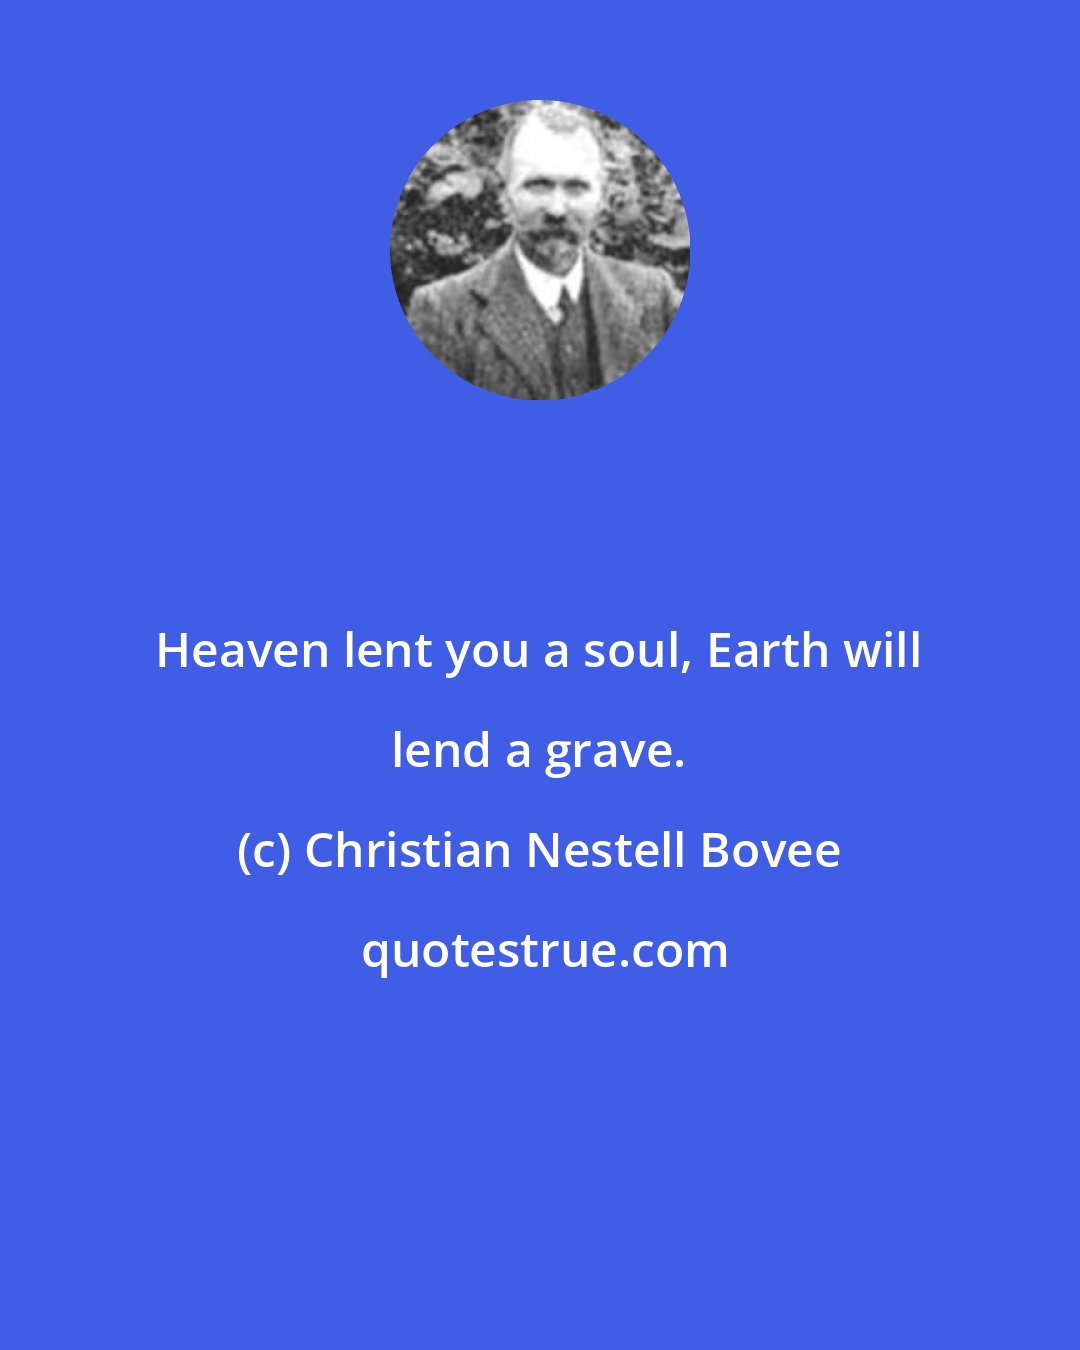 Christian Nestell Bovee: Heaven lent you a soul, Earth will lend a grave.